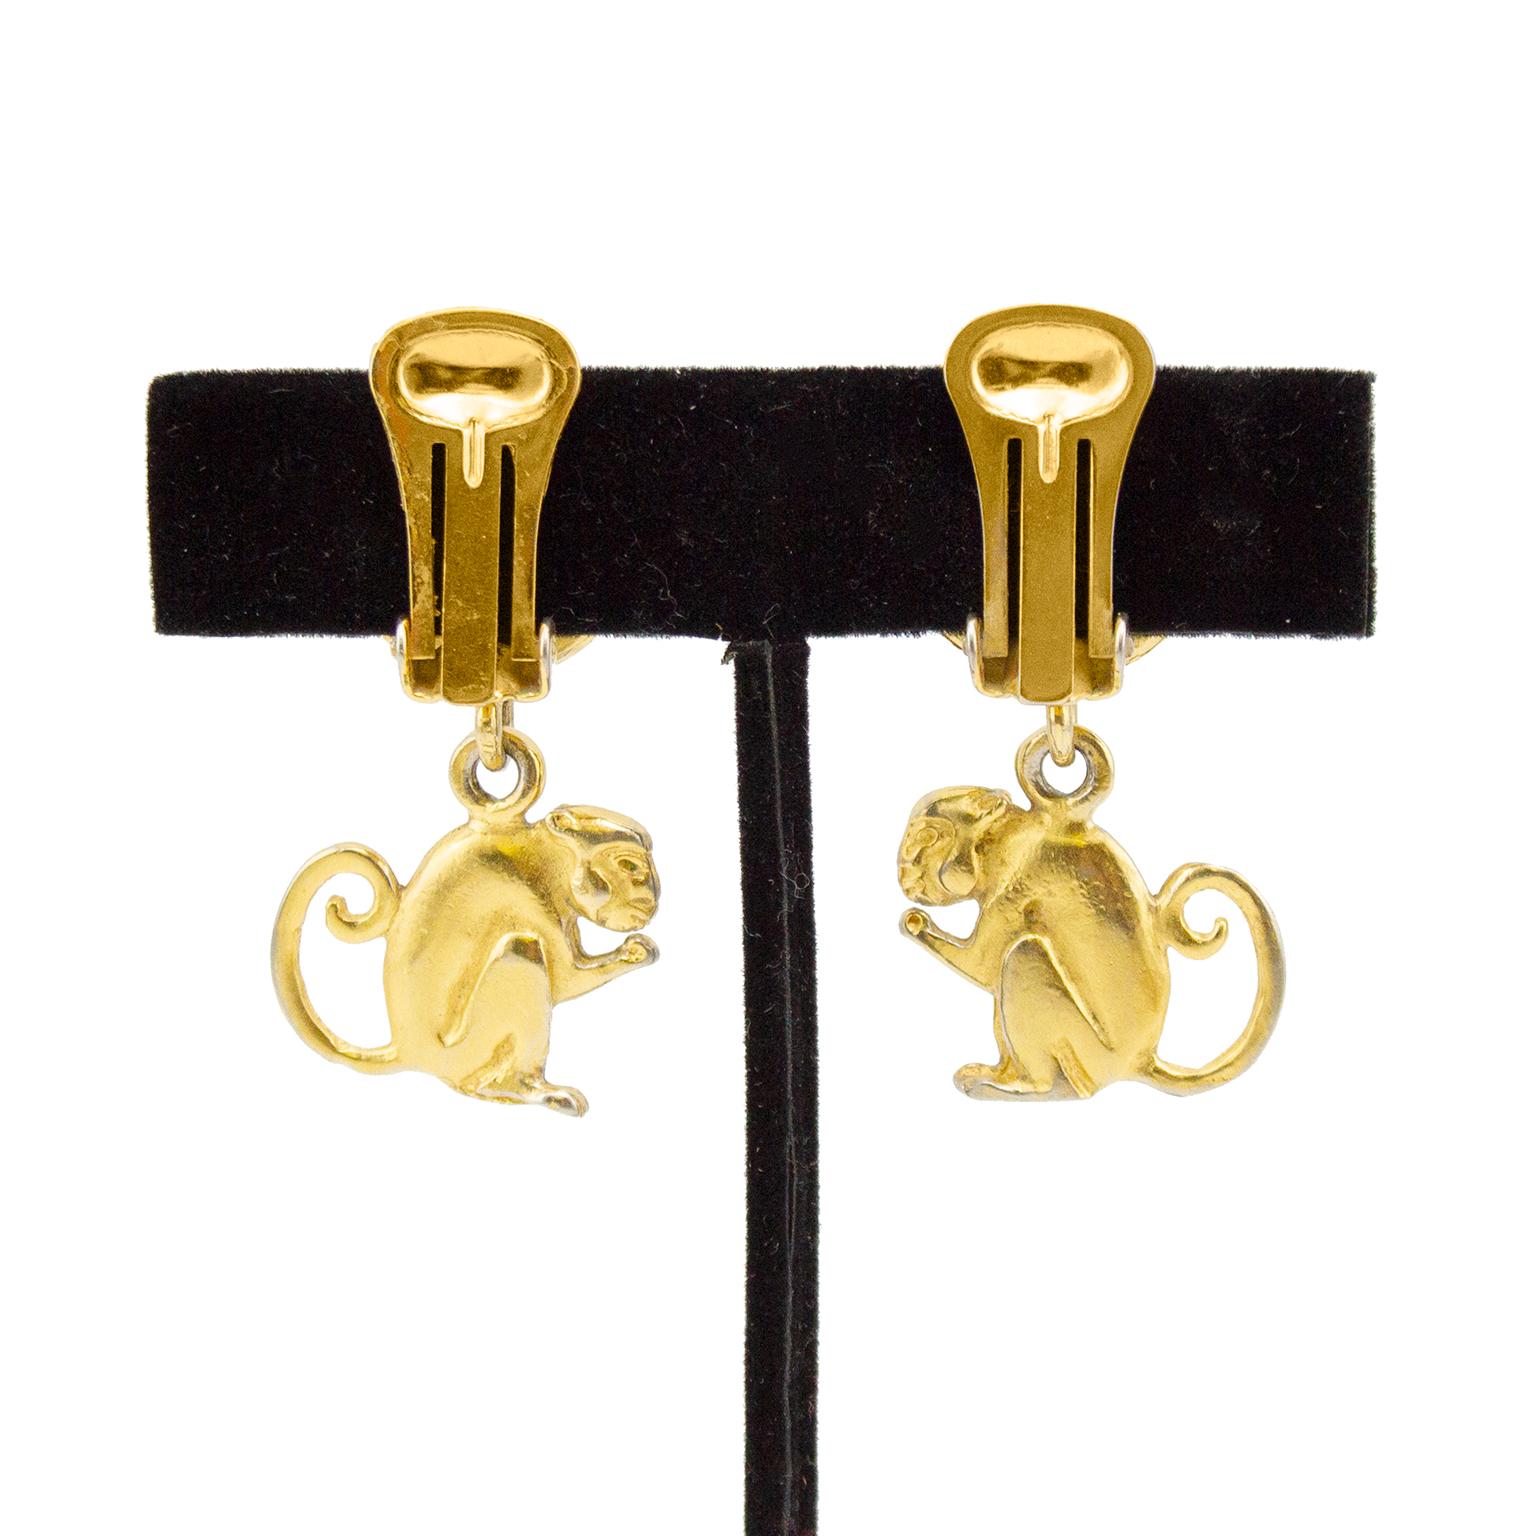 Stunning 1990's Celine clip on earrings. Gold tone metal buttons, engraved with Celine Paris. Drop monkey pendants facing each other. Celine and Made in Italy markings on interior. Vintage condition/patina - wear throughout to the gilt metal with